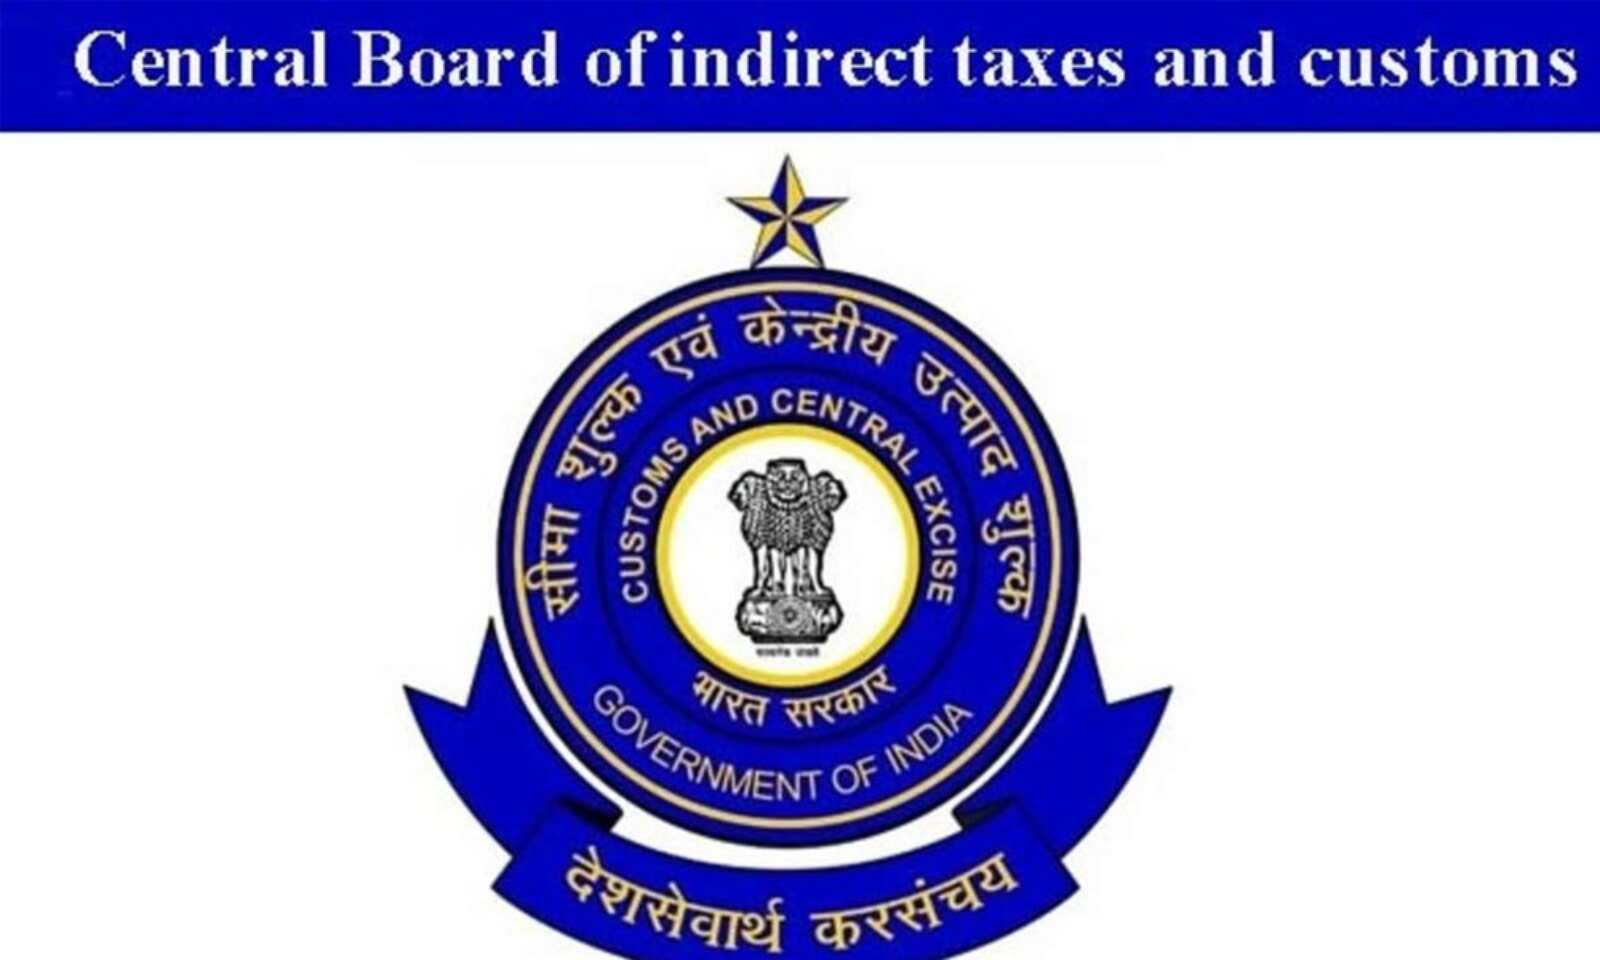 CBIC opens 3 taxpayer facilitation centres in Hyderabad